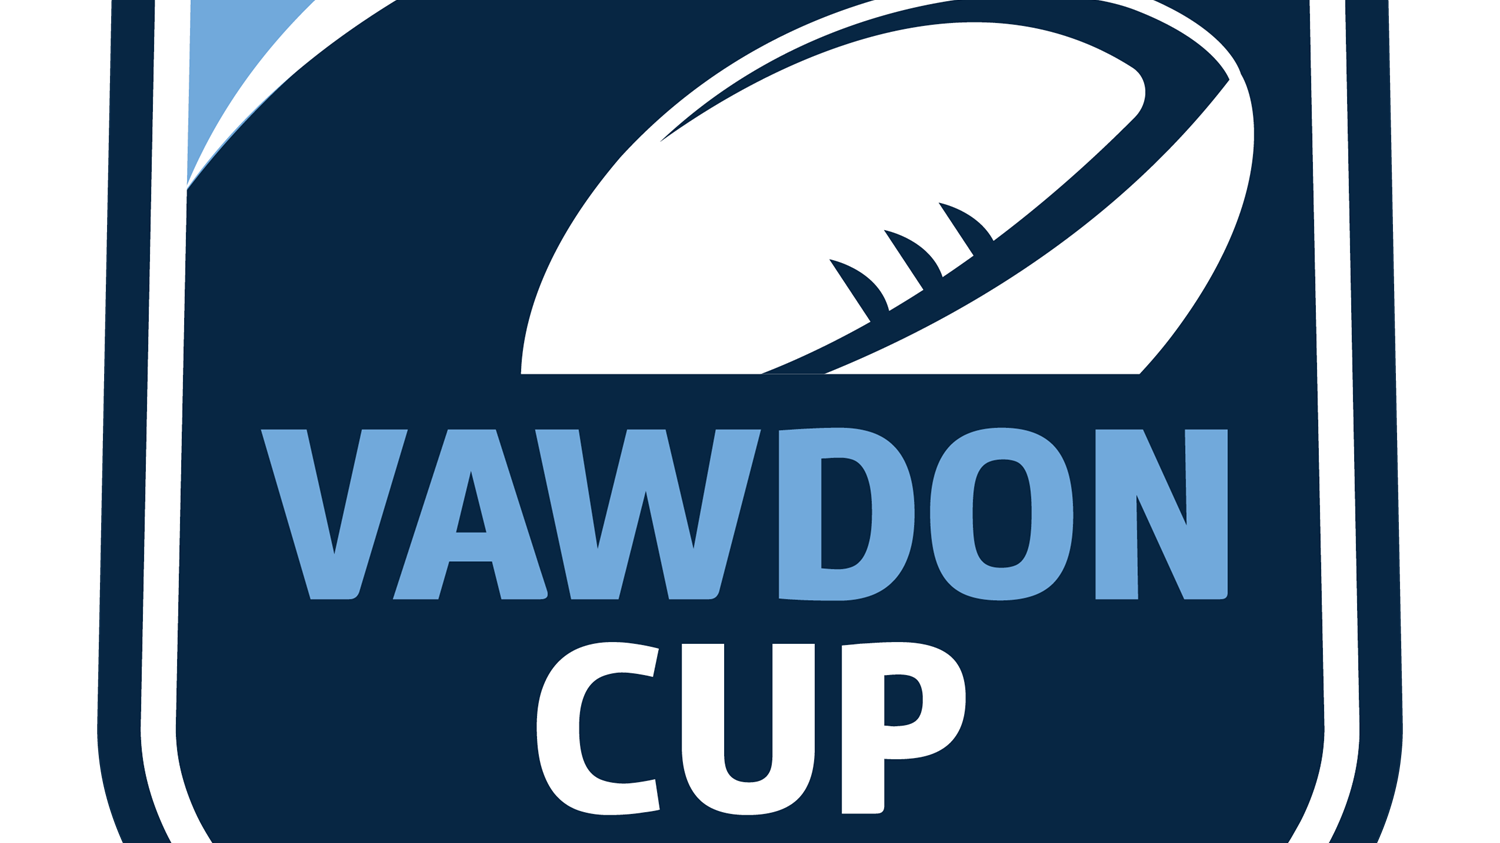 Vawdon Cup WPL - Grand Final - Manly Warringah v Canterbury Bulldogs Minigame Slate Image